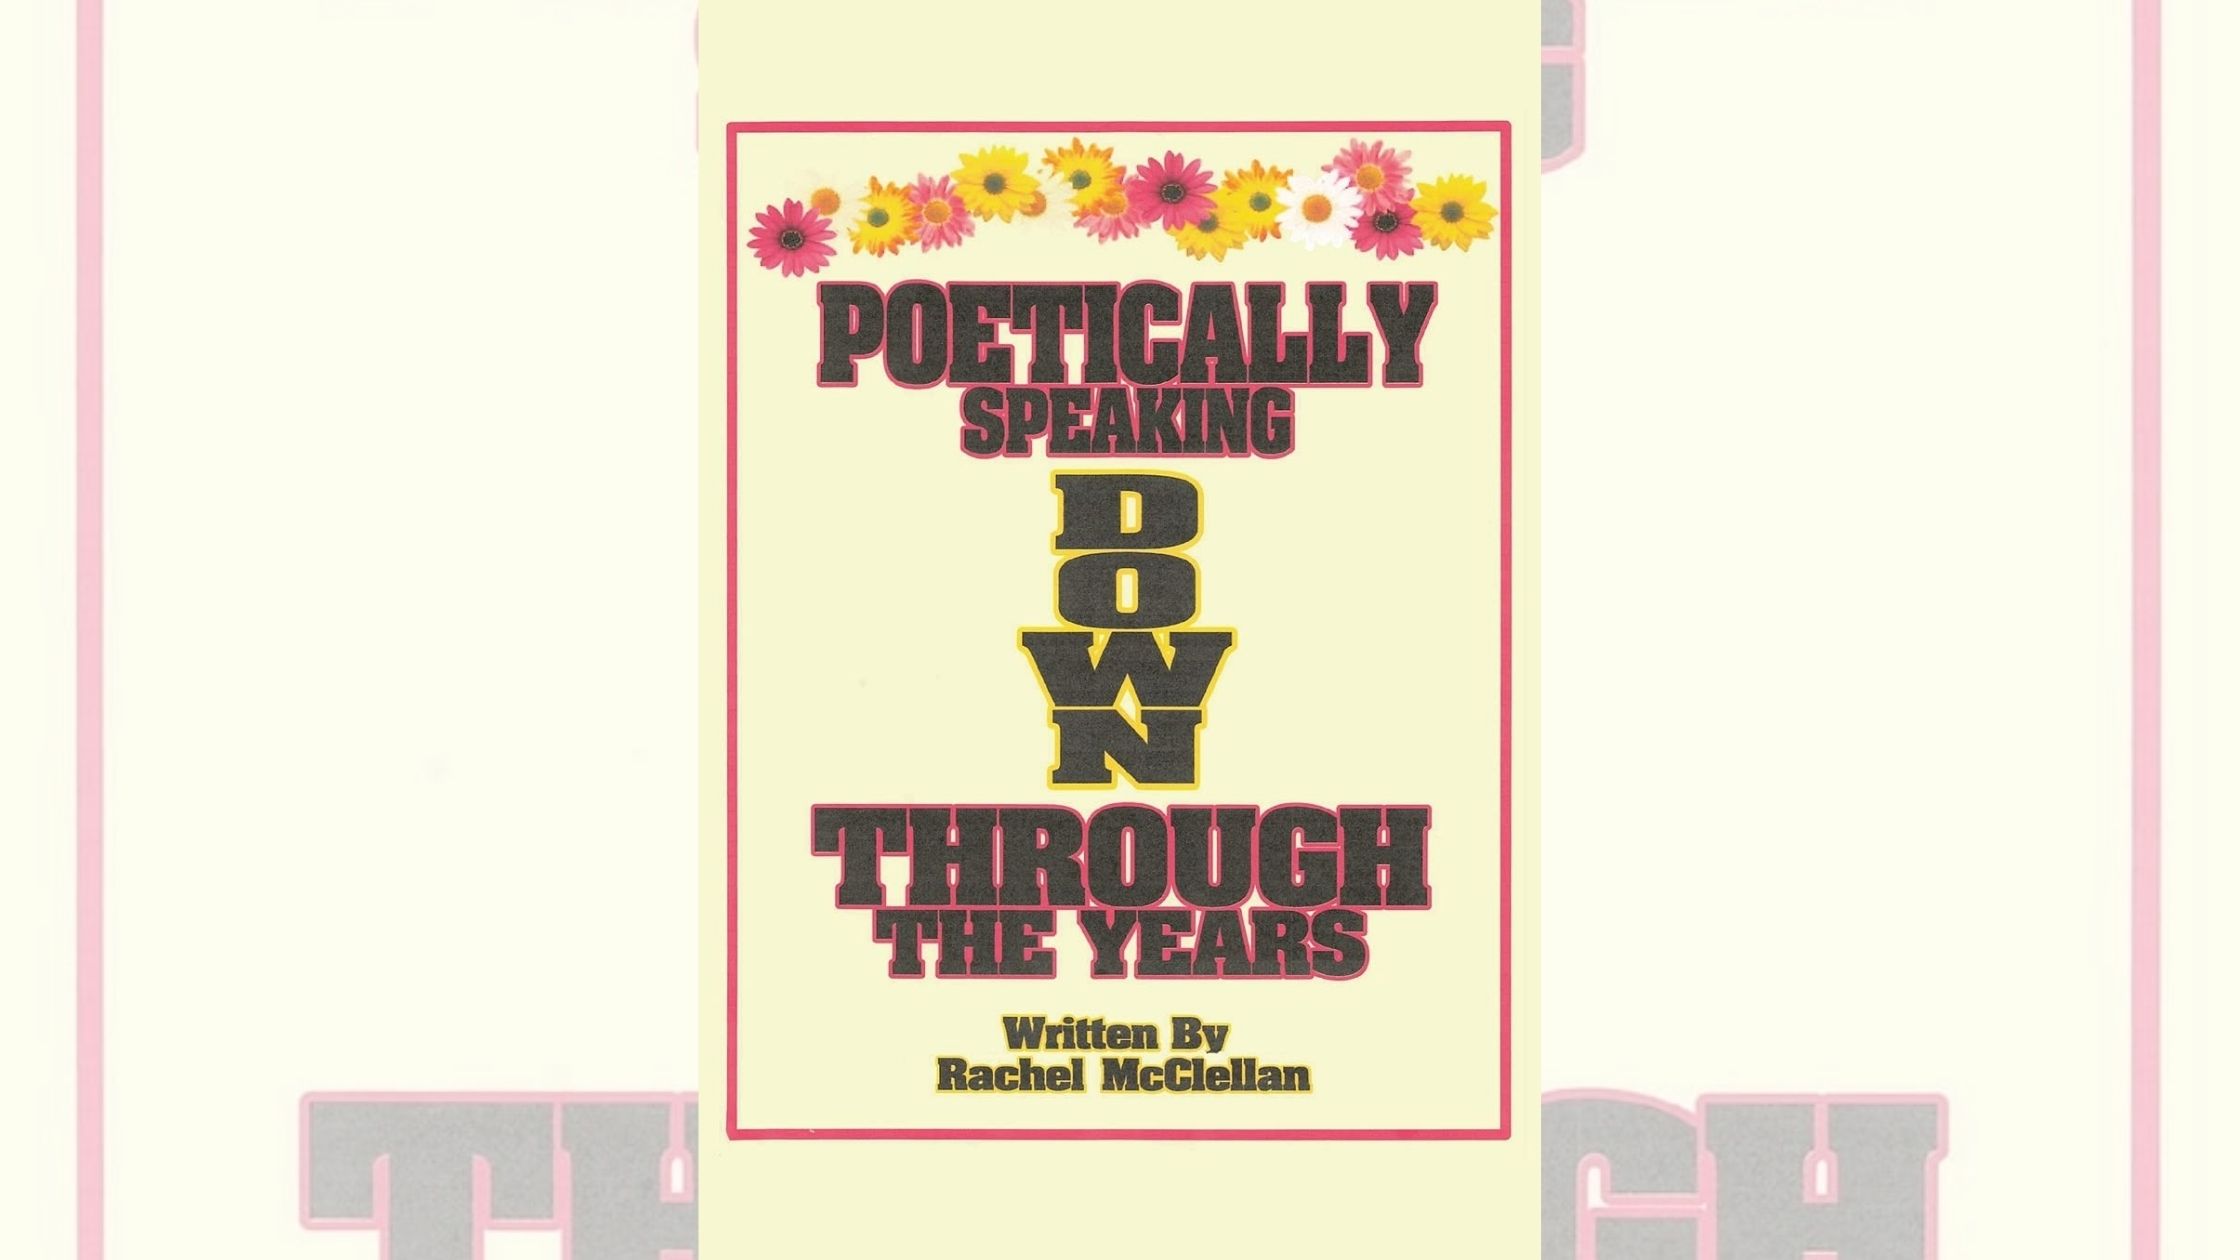 Rachel McClellan’s newly released “Poetically Speaking Down Through the Years” is an enjoyable collection of poems inspired by the ebb and flow of life